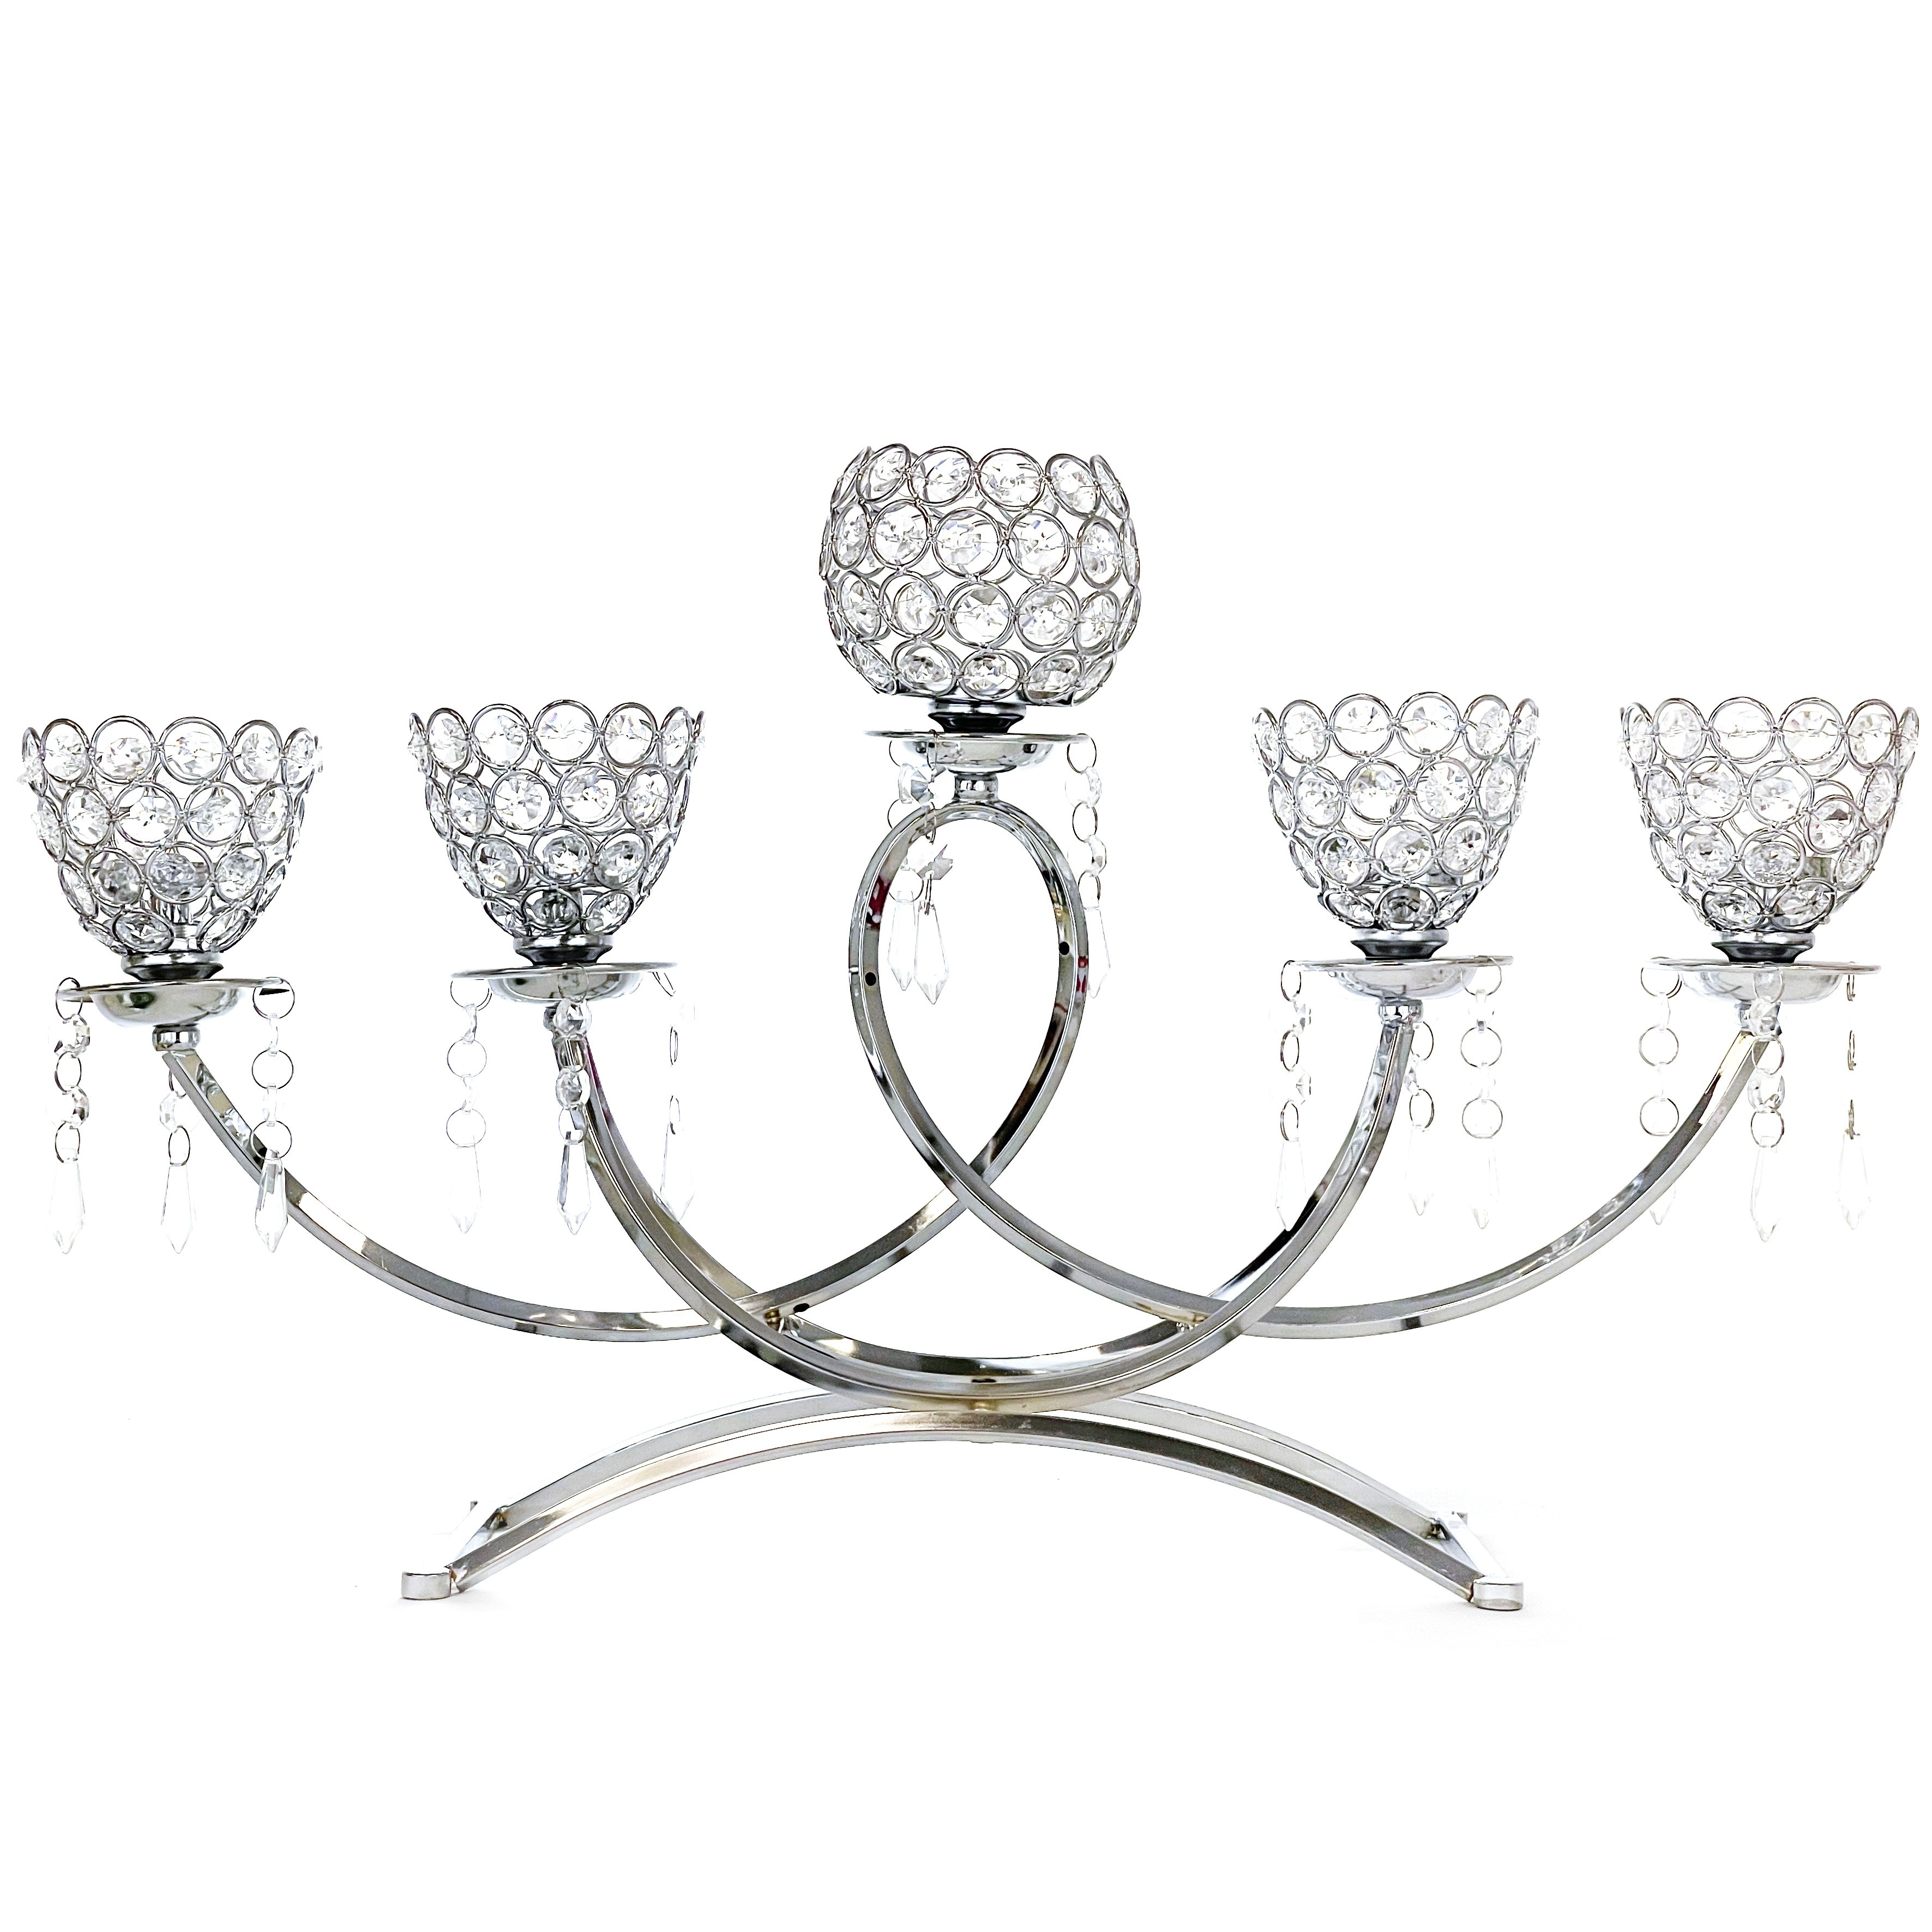 

5-arm Bowls Tealight Candelabra Candle Holder With Tulip Shaped Cup-silver Chrome Color Candle For Home Decor Wedding Christmas Church Halloween Party